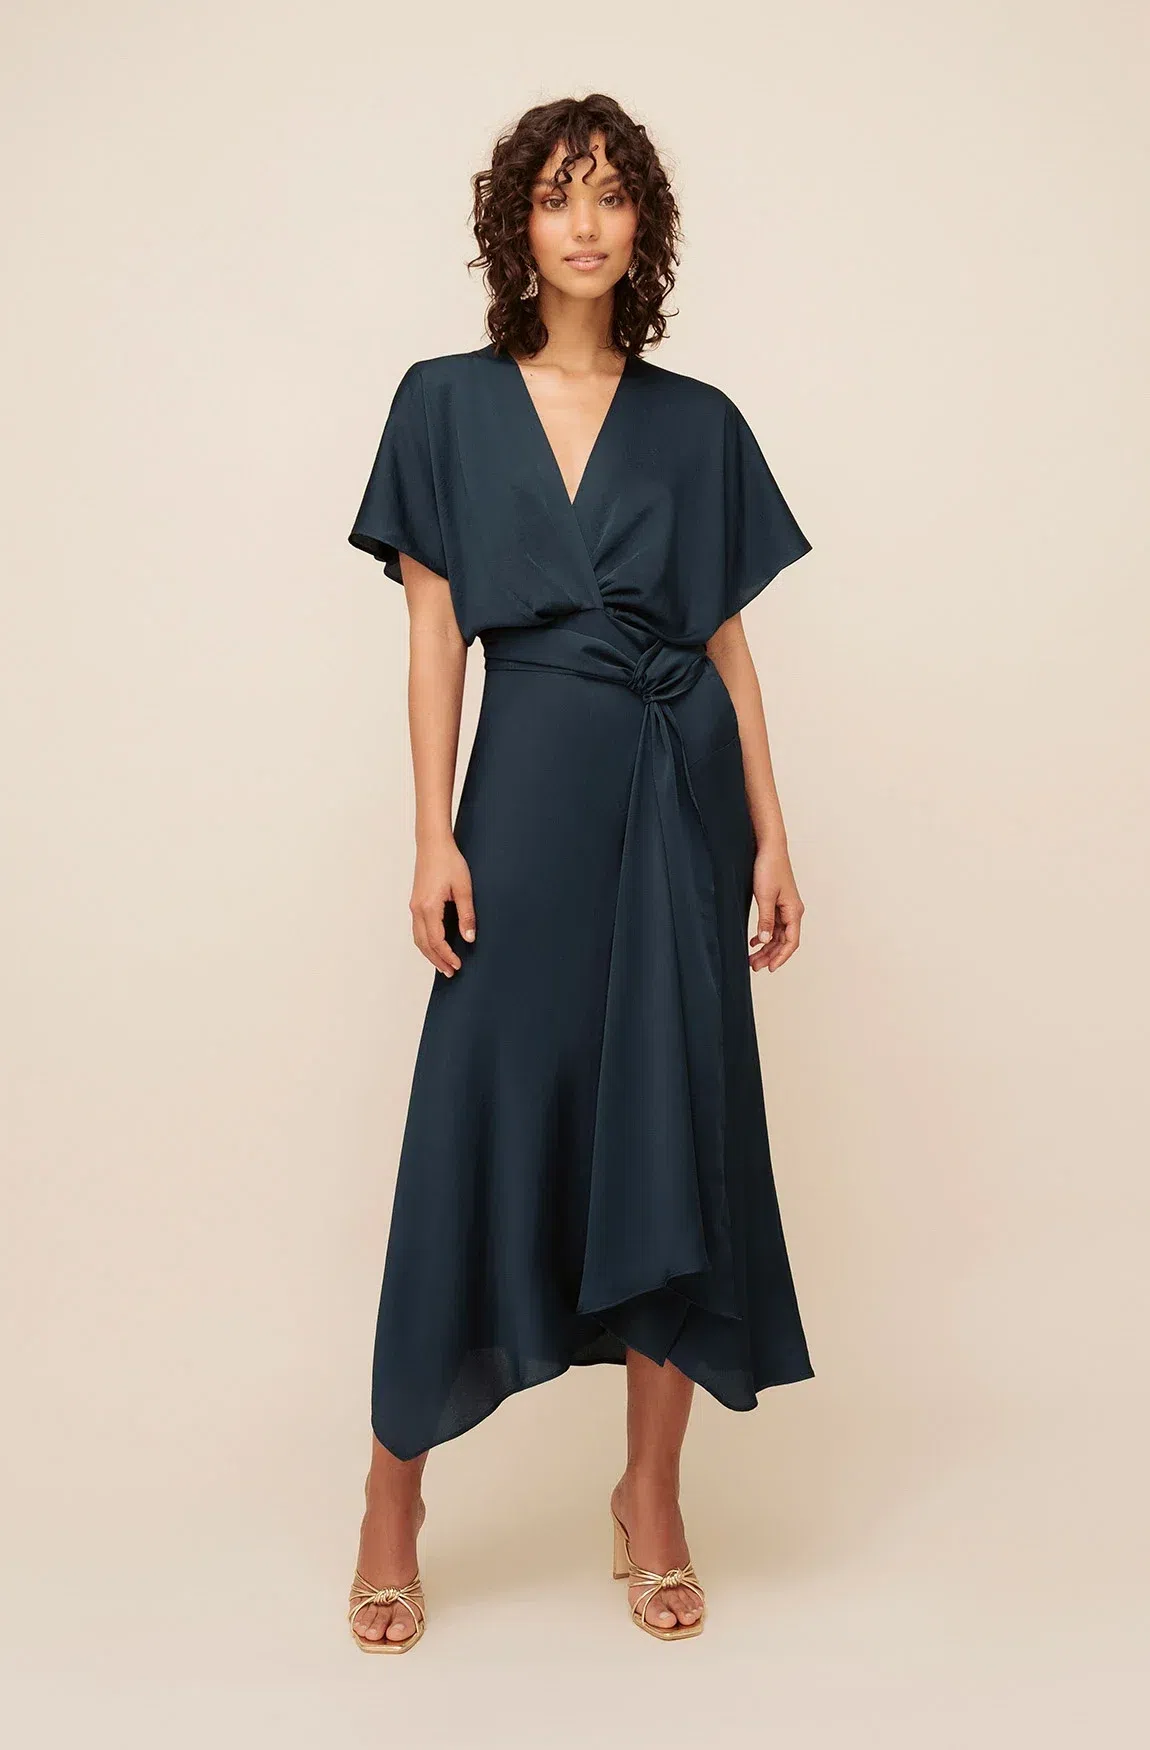 Sheike Wonderland Maxi Dress in Peacock Size 12 | The Volte